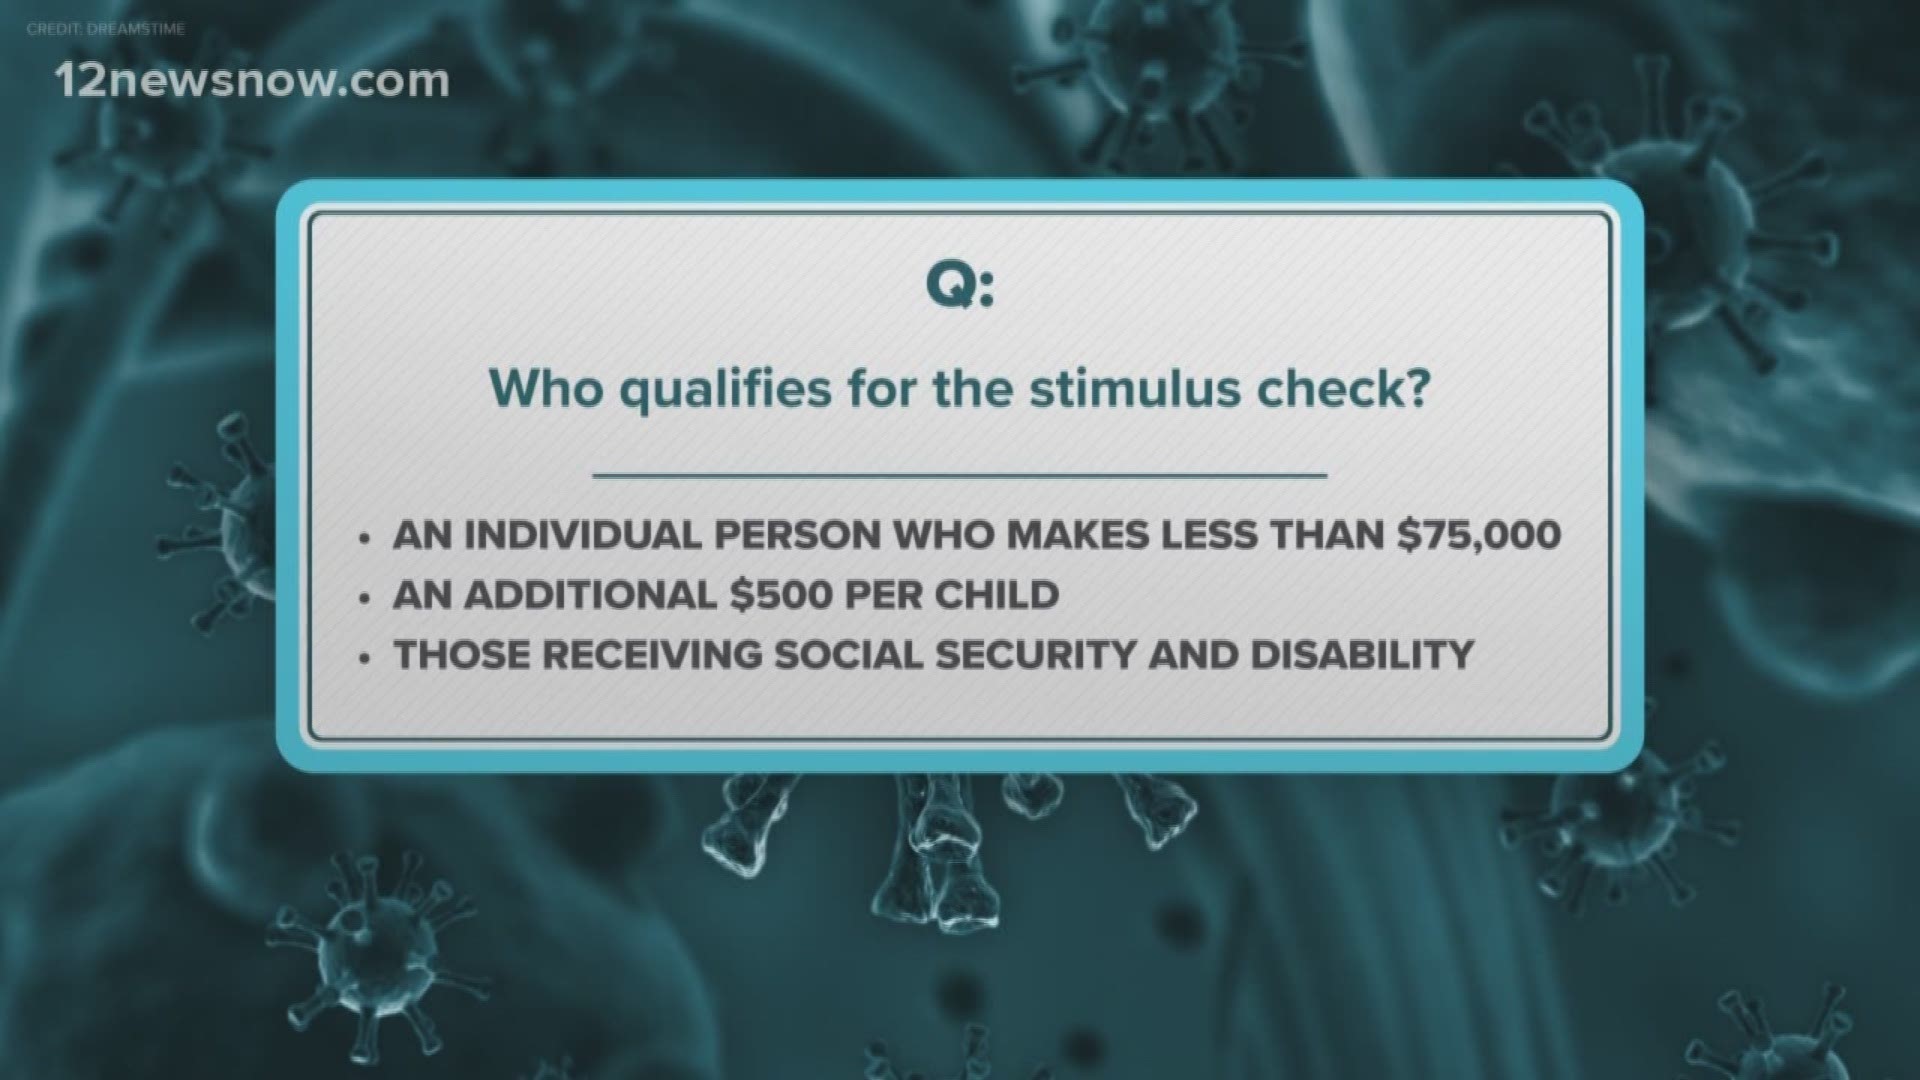 12News is looking into the details of who is eligible for a stimulus check